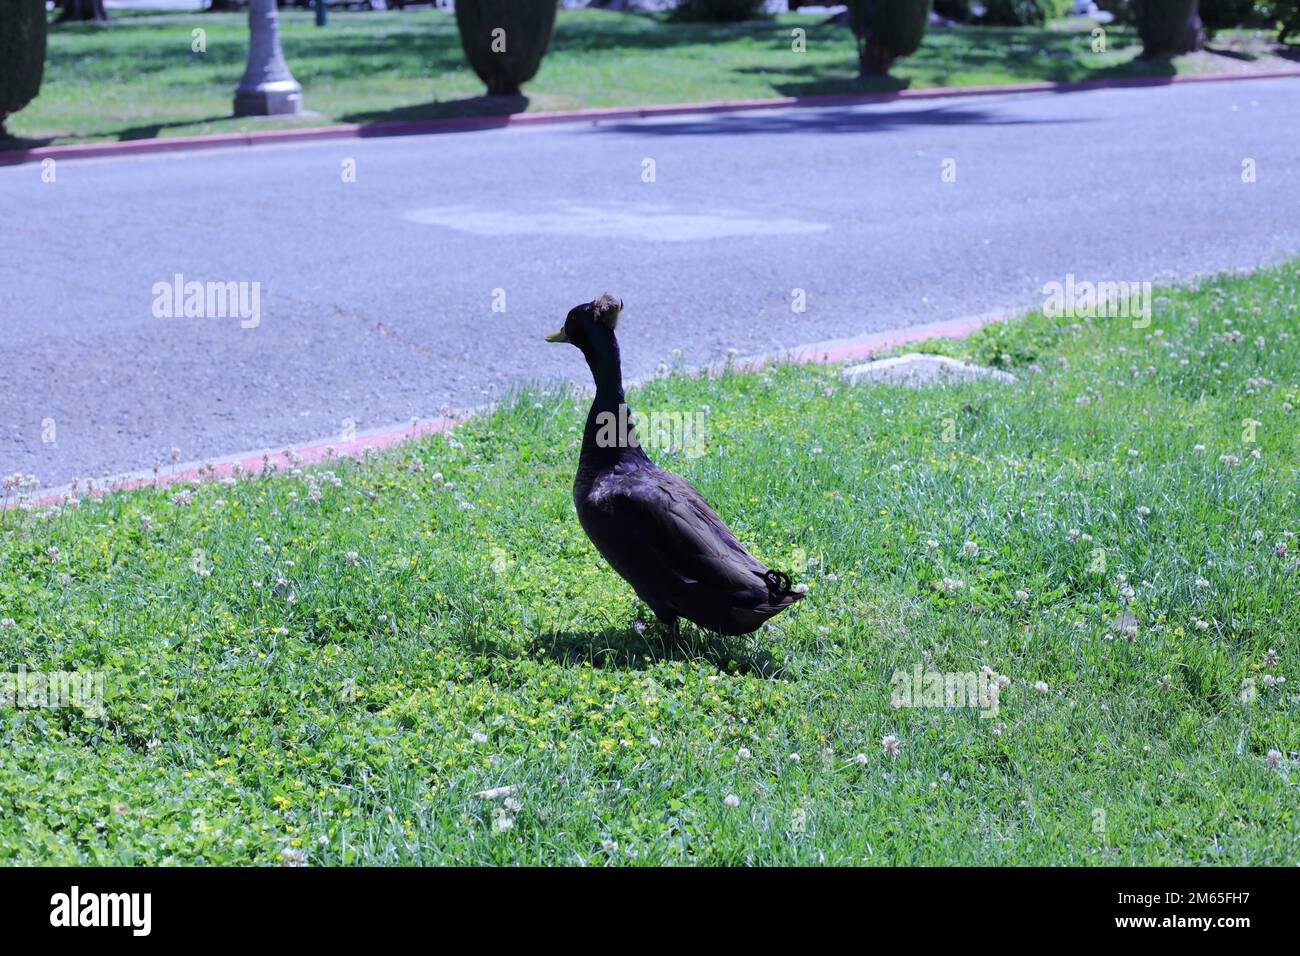 A duck enjoys walking in a park Stock Photo